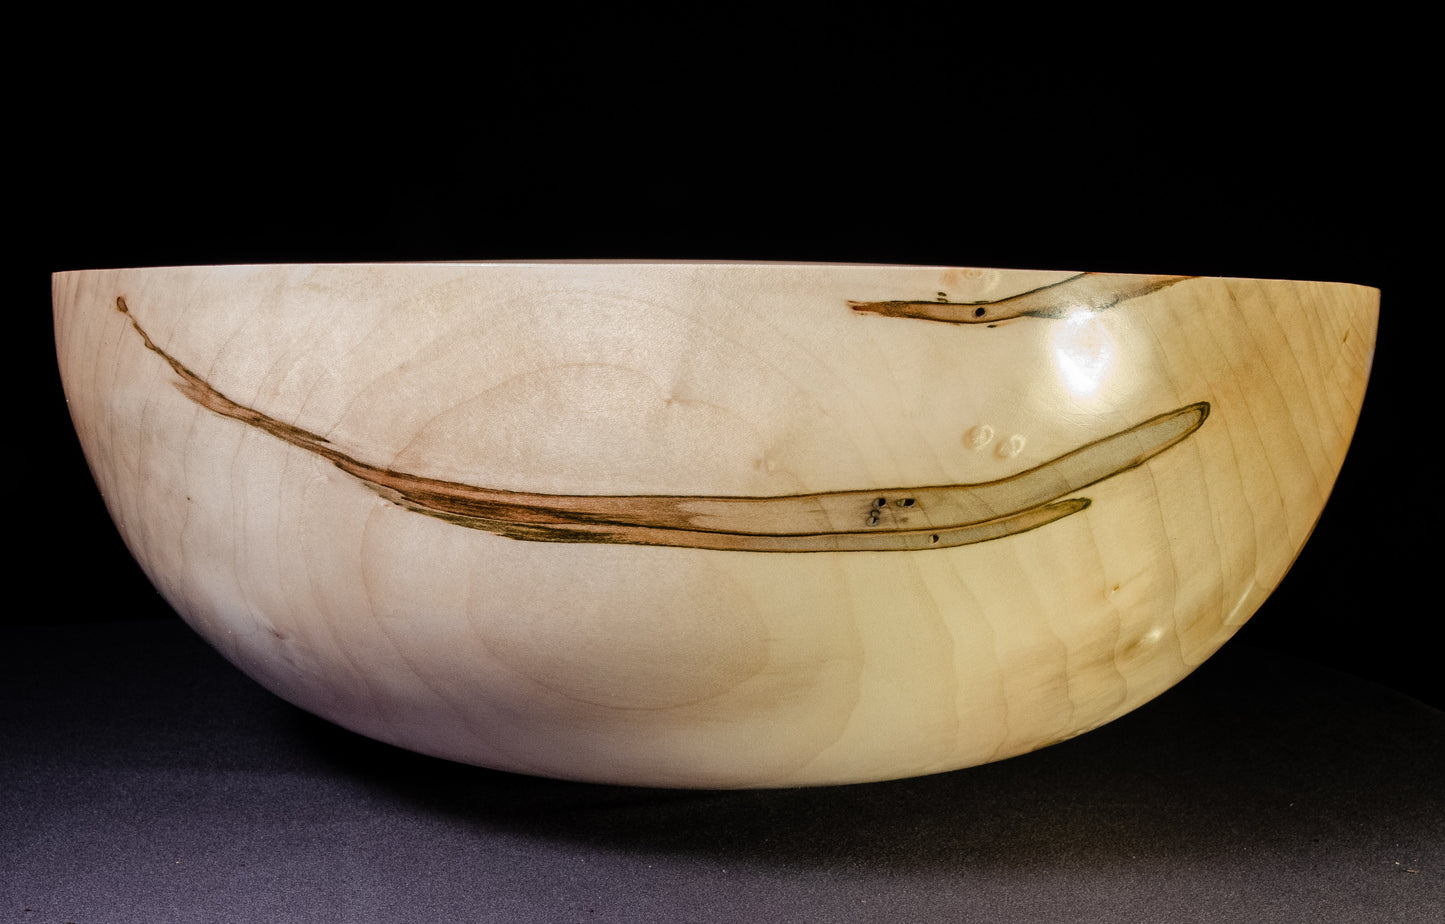 Large ambrosia maple bowl for salad, fruit, popcorn or as a decorative piece, wonderful gift for wedding, home visit